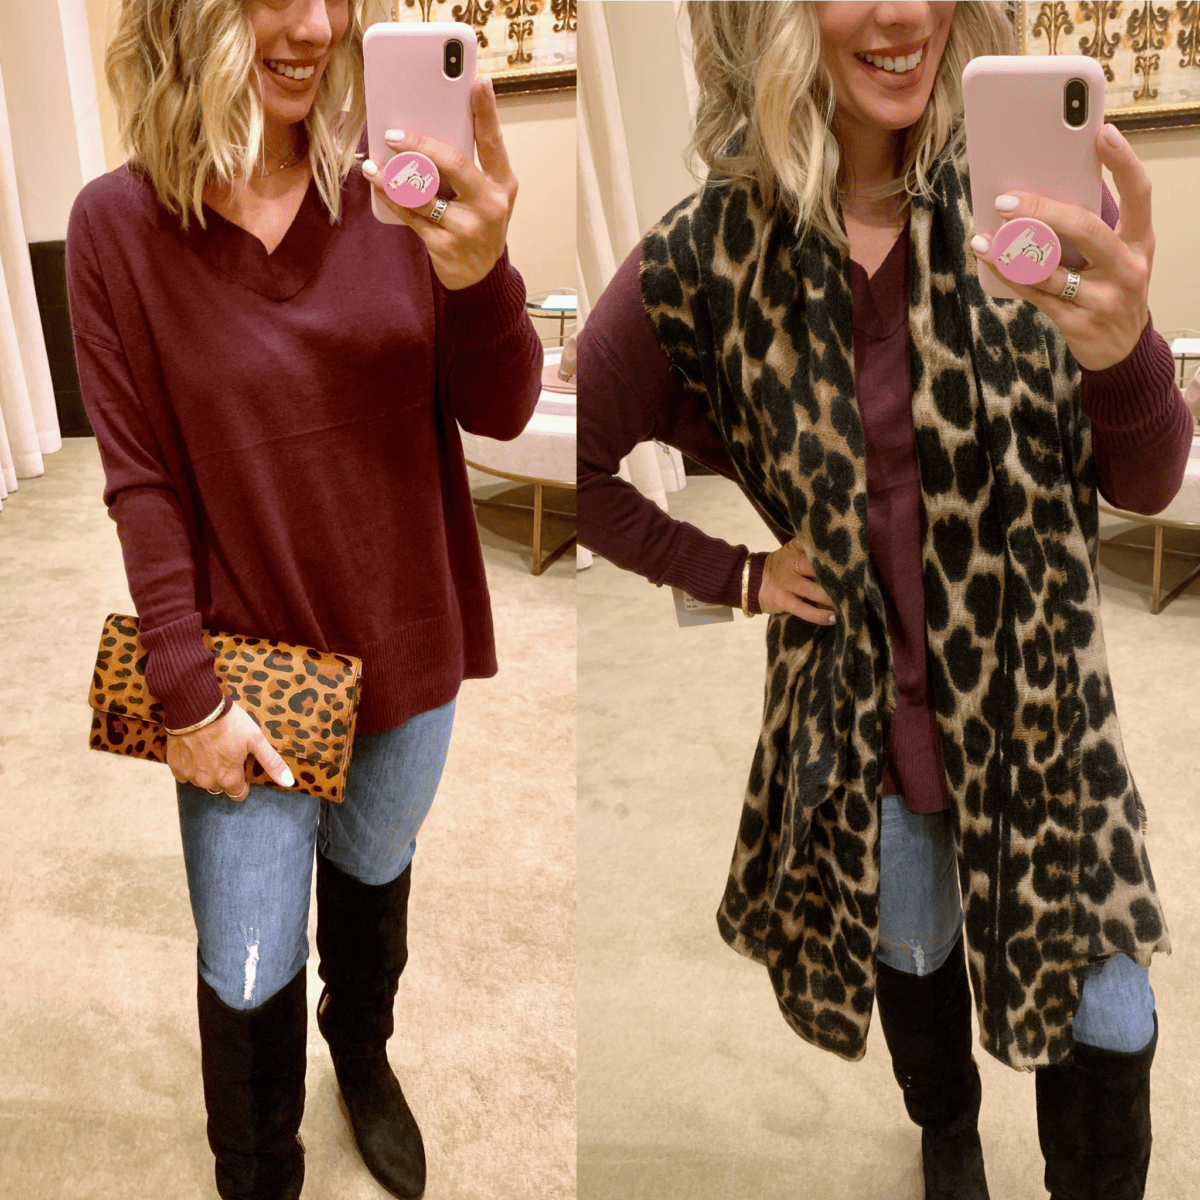 Madewell Outfit + Clare V Leopard Bag - Pretty in Pink Megan